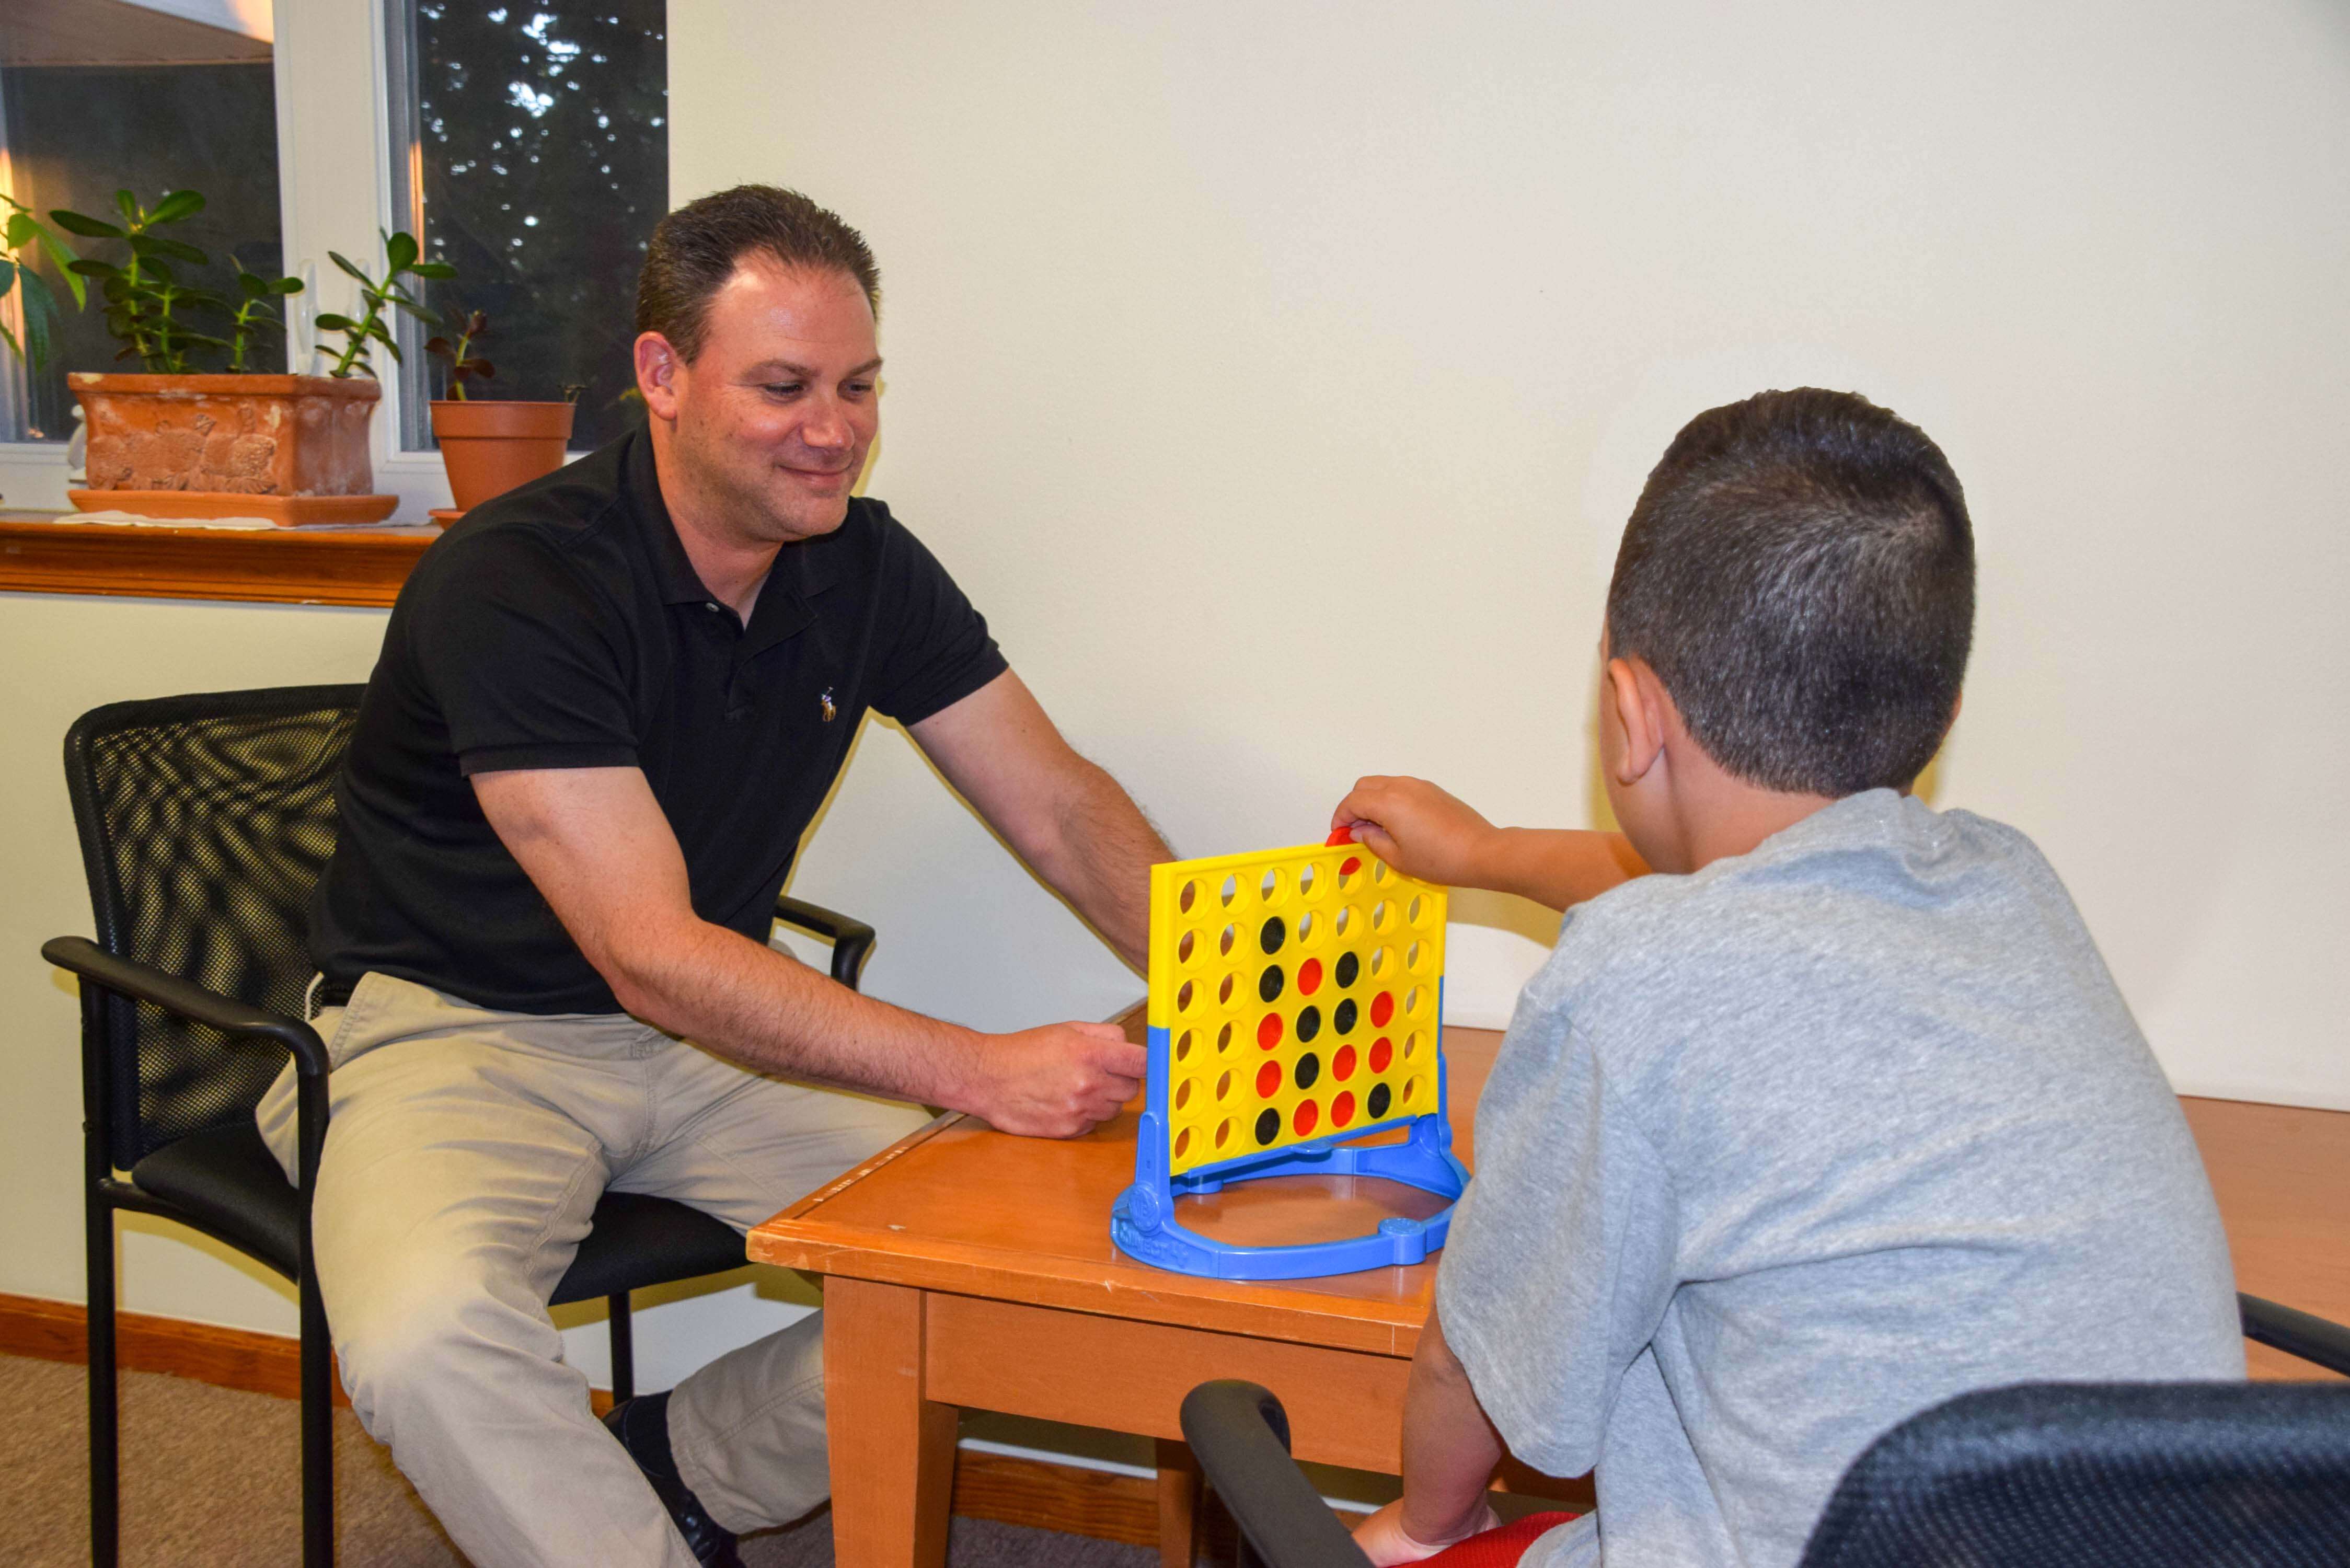 A young boy putting a Connect Four piece into the grid in a game with Joel Sperling